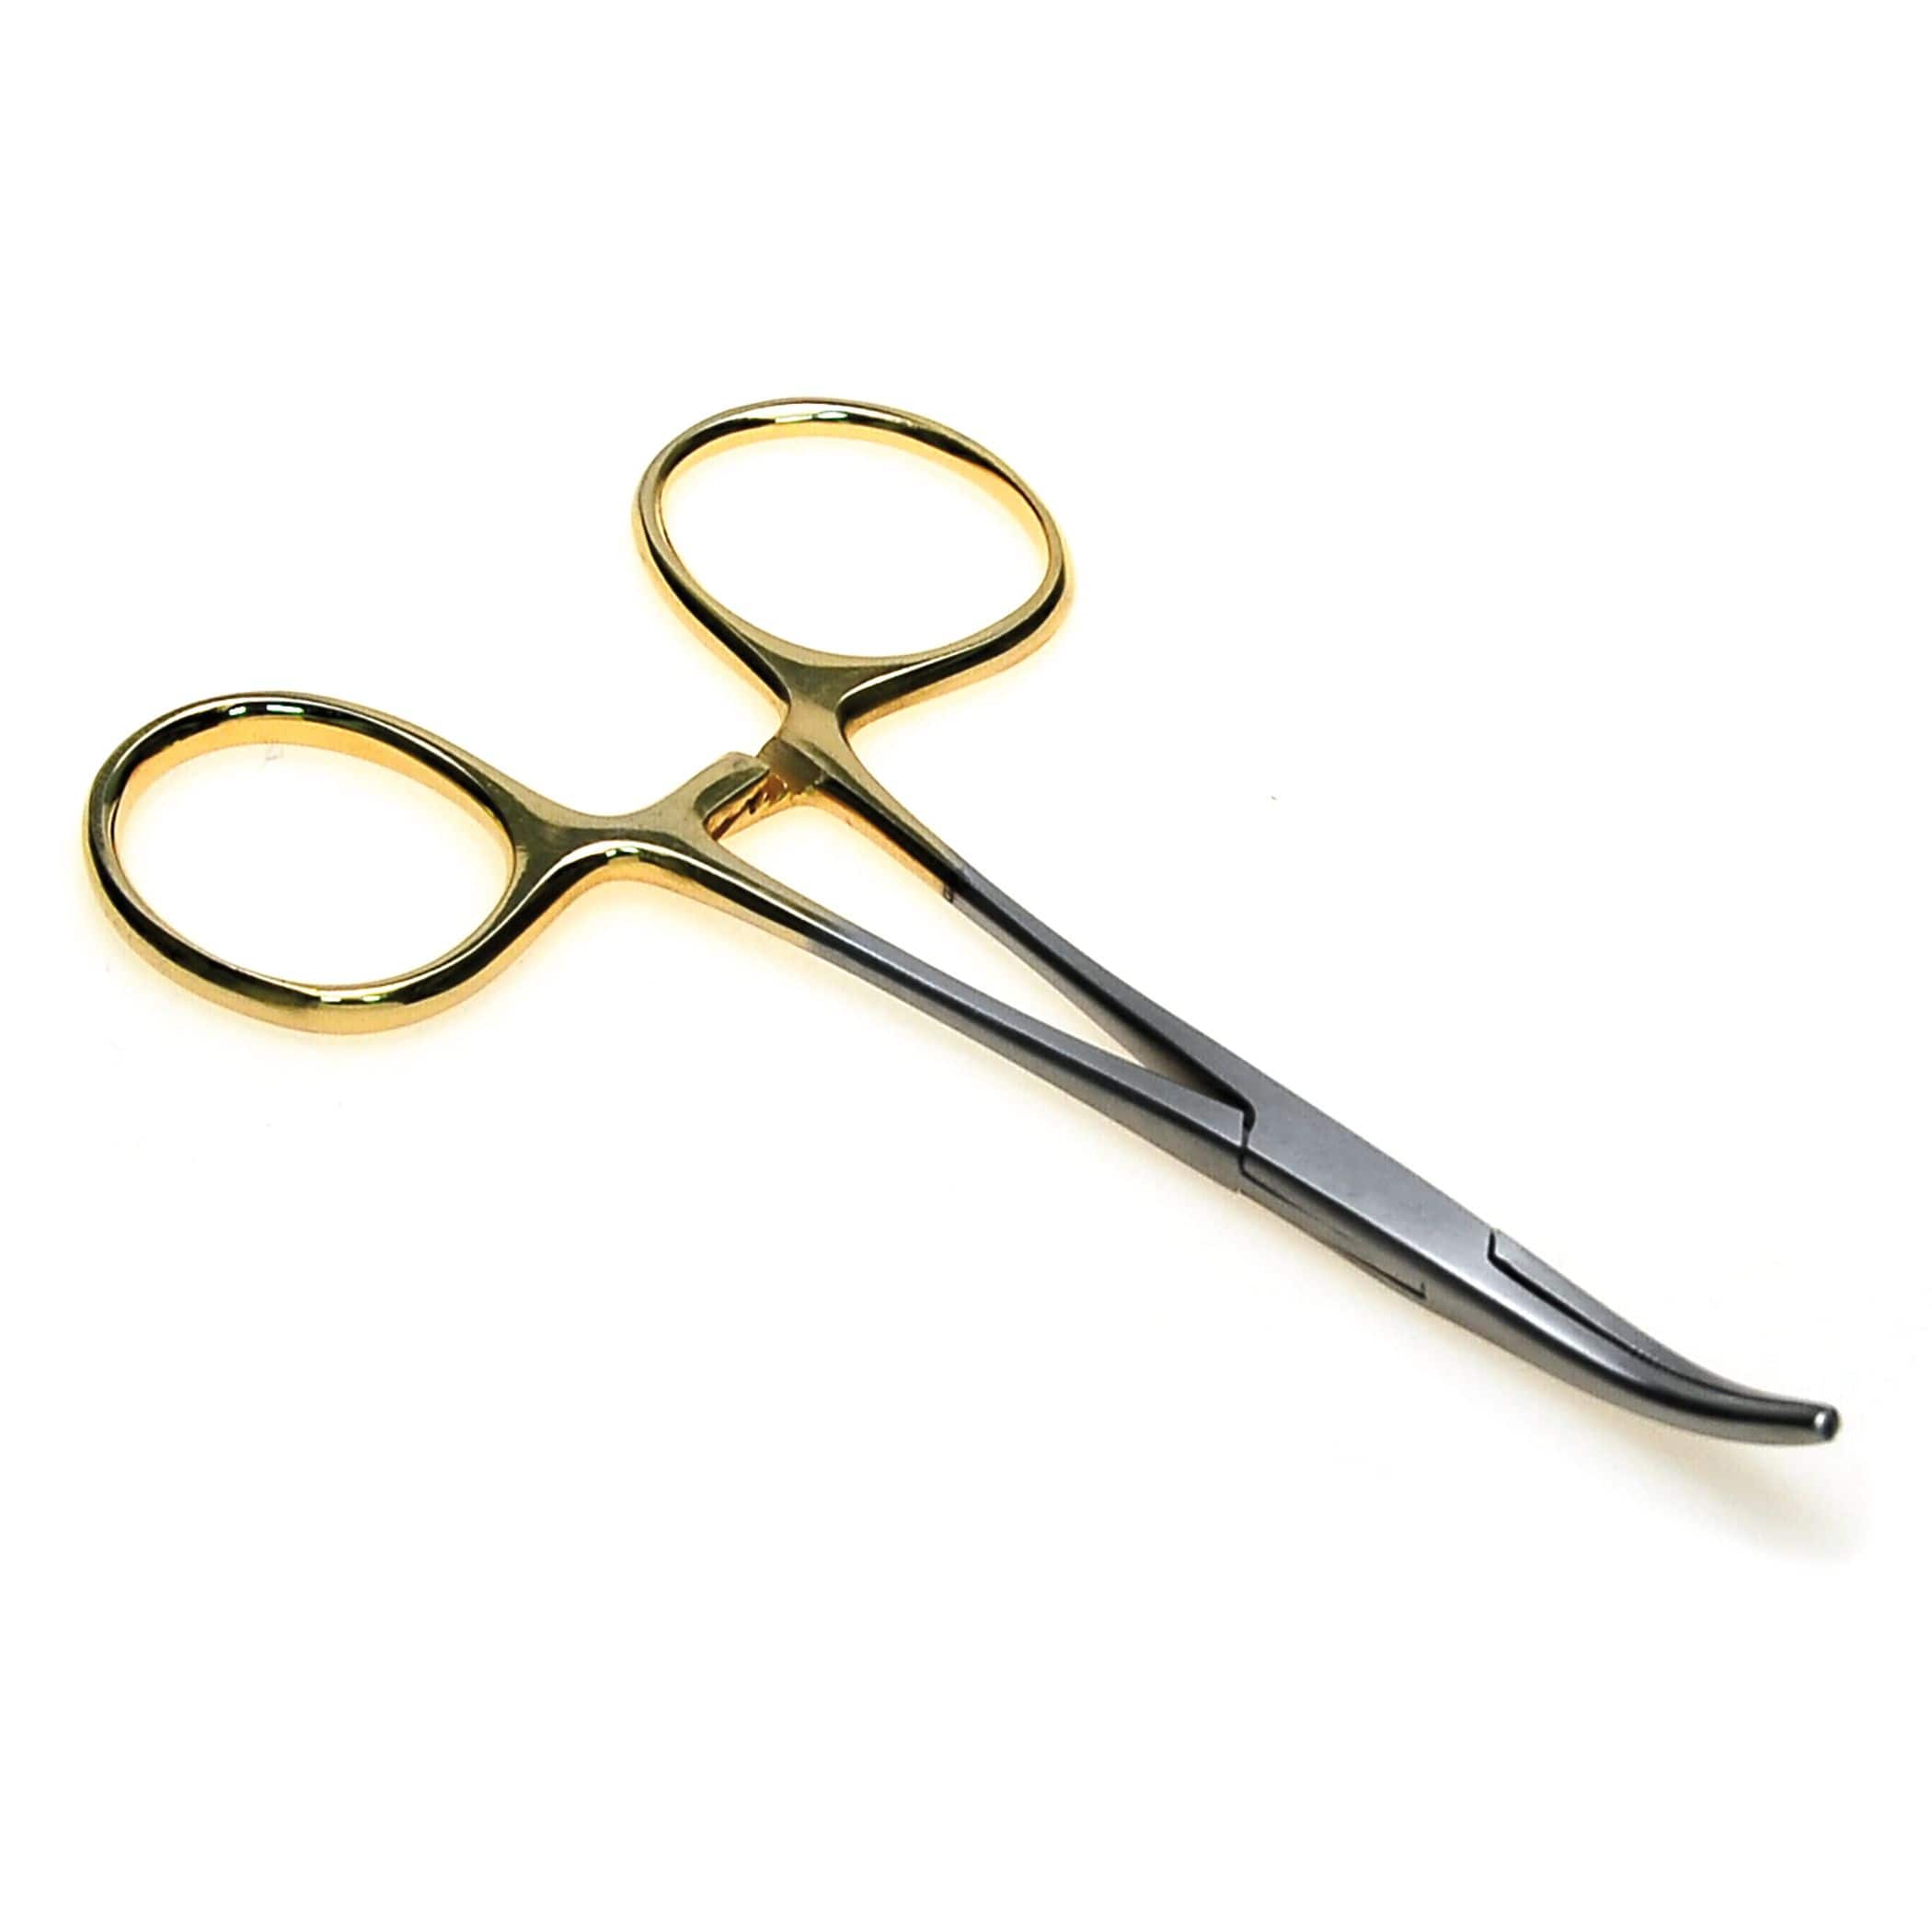 https://media-www.canadiantire.ca/product/playing/fishing/fishing-accessories/0772372/superfly-accessories-curved-gold-forcep-large-b8820edc-b73e-4c01-b478-753d635055ba-jpgrendition.jpg